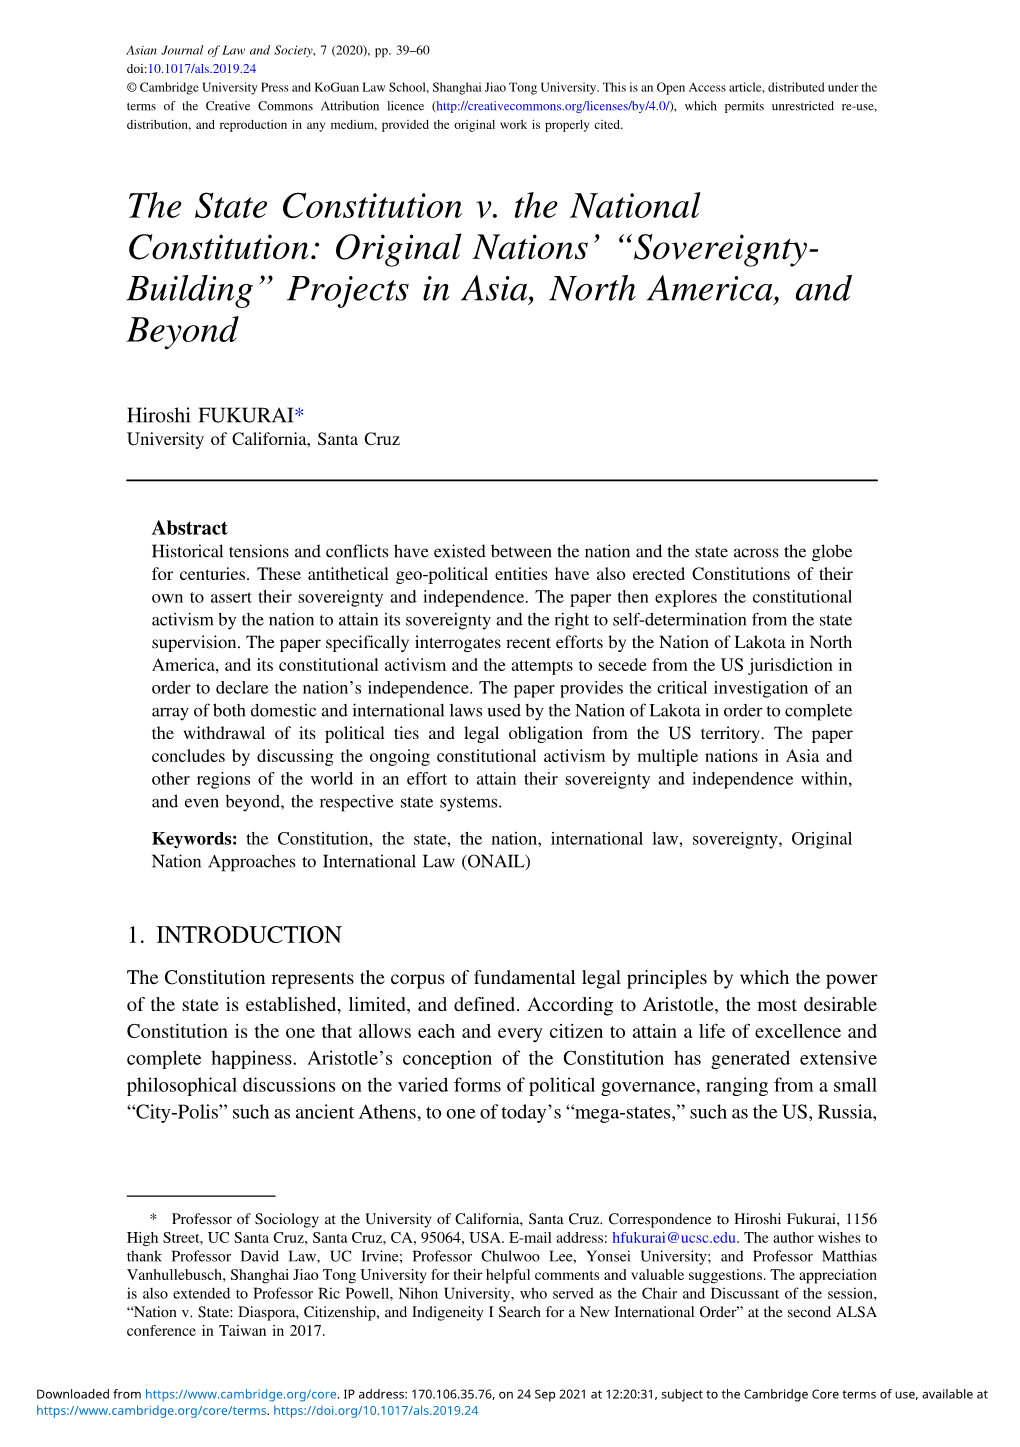 Original Nations’“Sovereignty- Building” Projects in Asia, North America, and Beyond